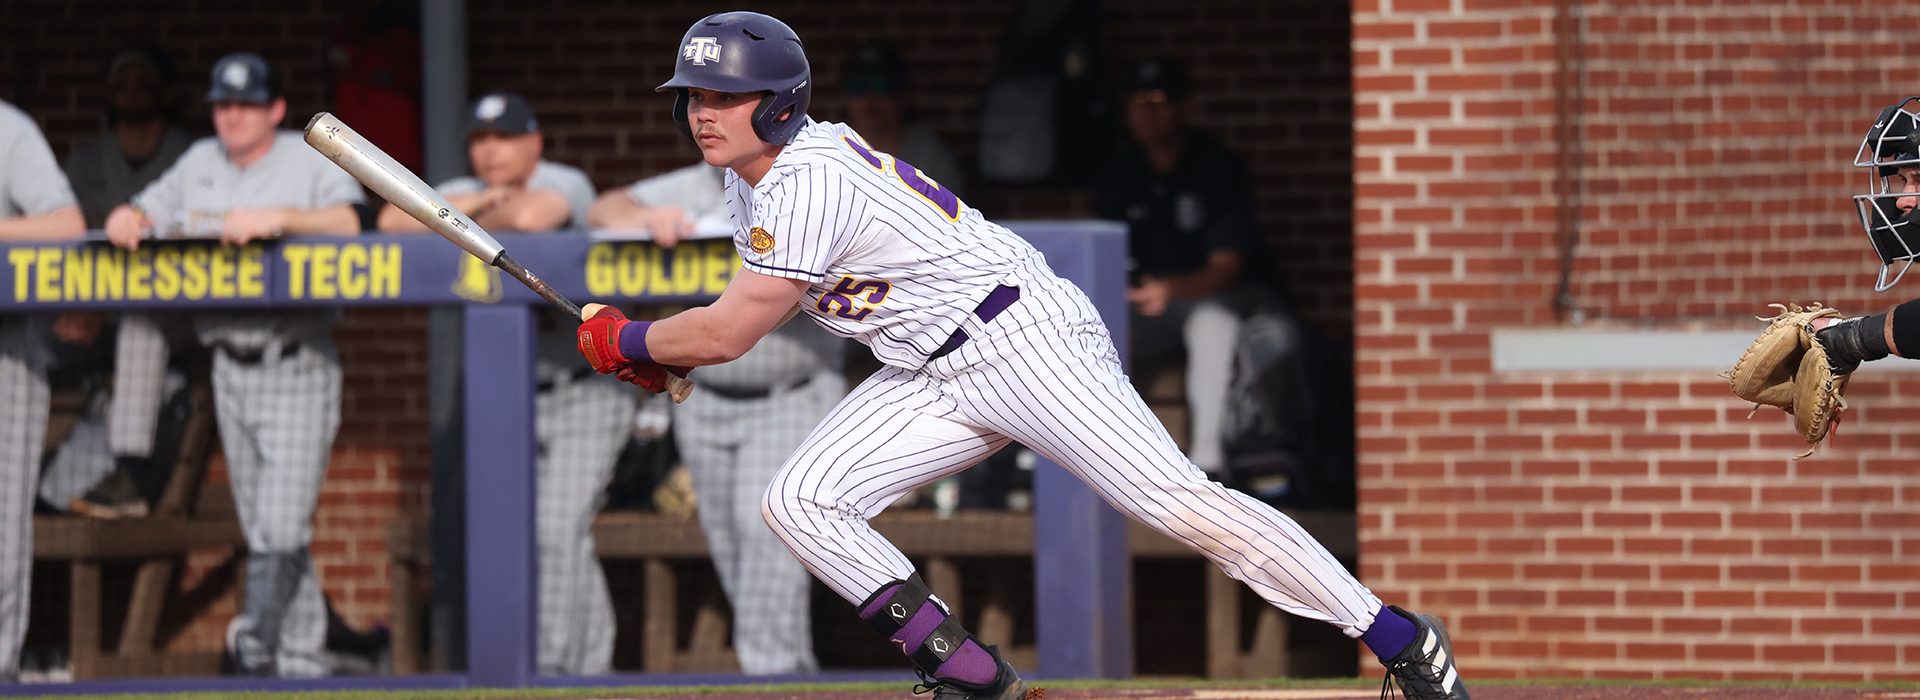 Golden Eagles fall to in-state foe Lipscomb in midweek action